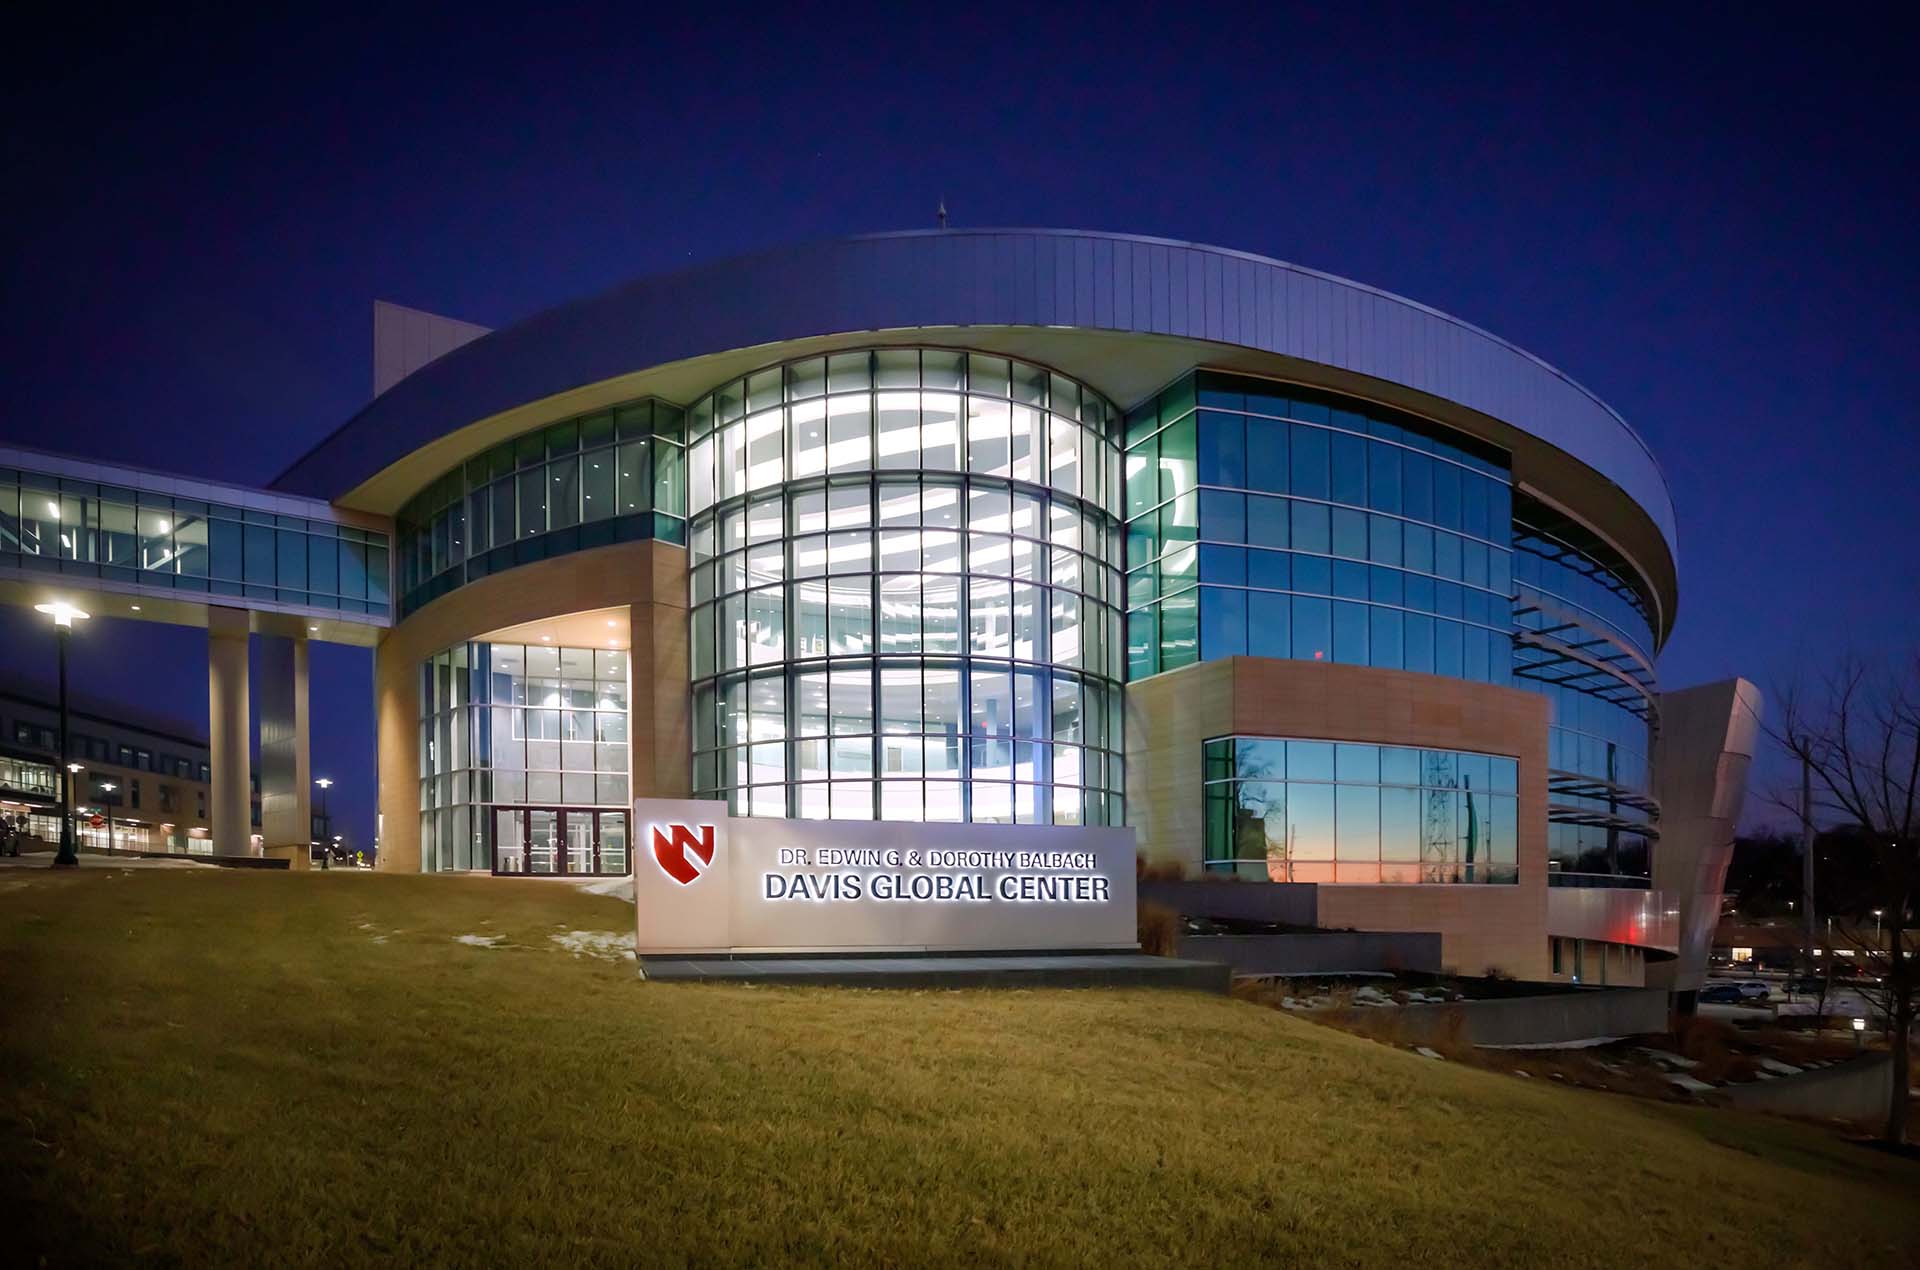 The iEXCEL program is housed in the Dr&period; Edwin G&period; & Dorothy Balbach Davis Global Center&period;